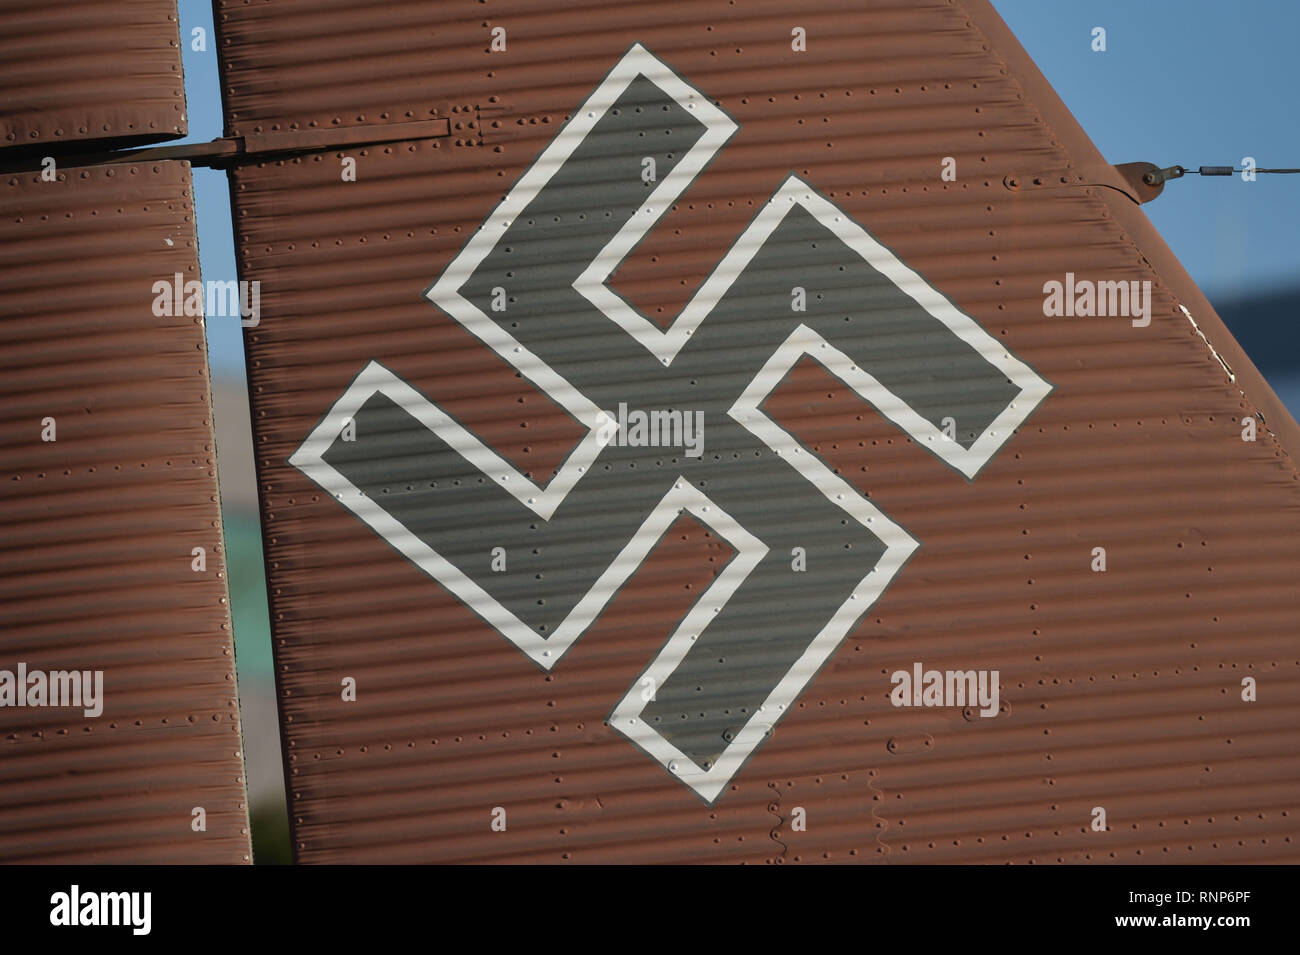 February 19, 2019 - Krakow, Malopolski Province, Poland - The Balkenkreuz, a straight-armed cross insignia seen painted on the Junkers Ju 52 at the Polish Aviation Museum..The Polish Aviation Museum is located at the site of the former Krakow-Rakowice-Czyzyny Airport, established in 1912, one of the oldest in the world. The Museum collection consists of over 200 aircraft, dating WW1, WW2 and a collection of all airplane types developed or used by Poland after 1945. (Credit Image: © Cezary Kowalski/SOPA Images via ZUMA Wire) Stock Photo